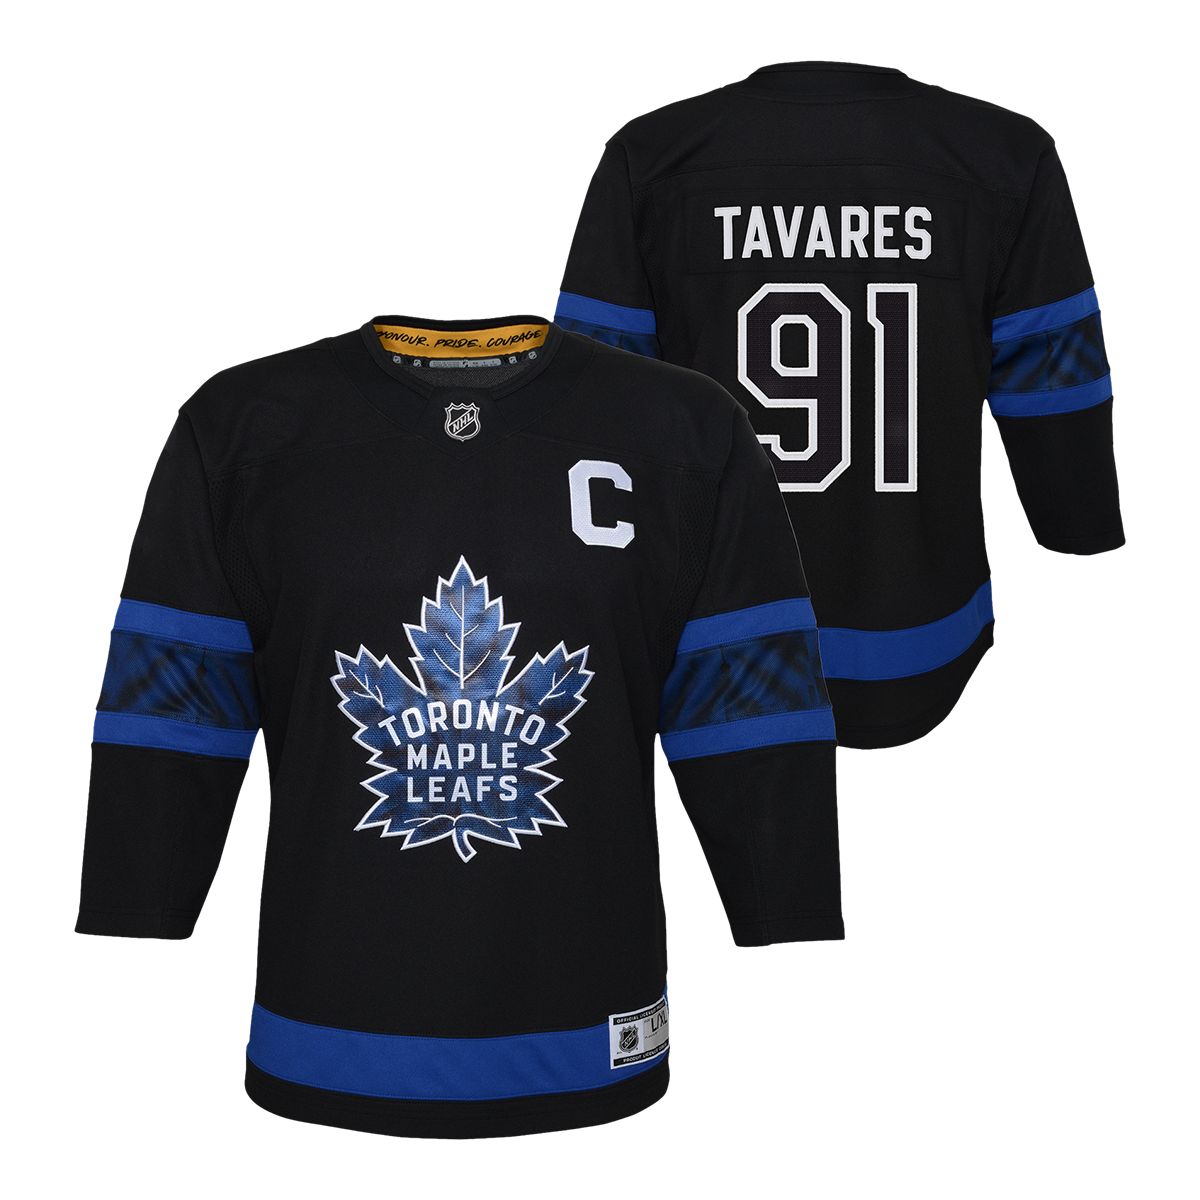 Maple Leafs collaborate with Justin Bieber on Next Gen jersey